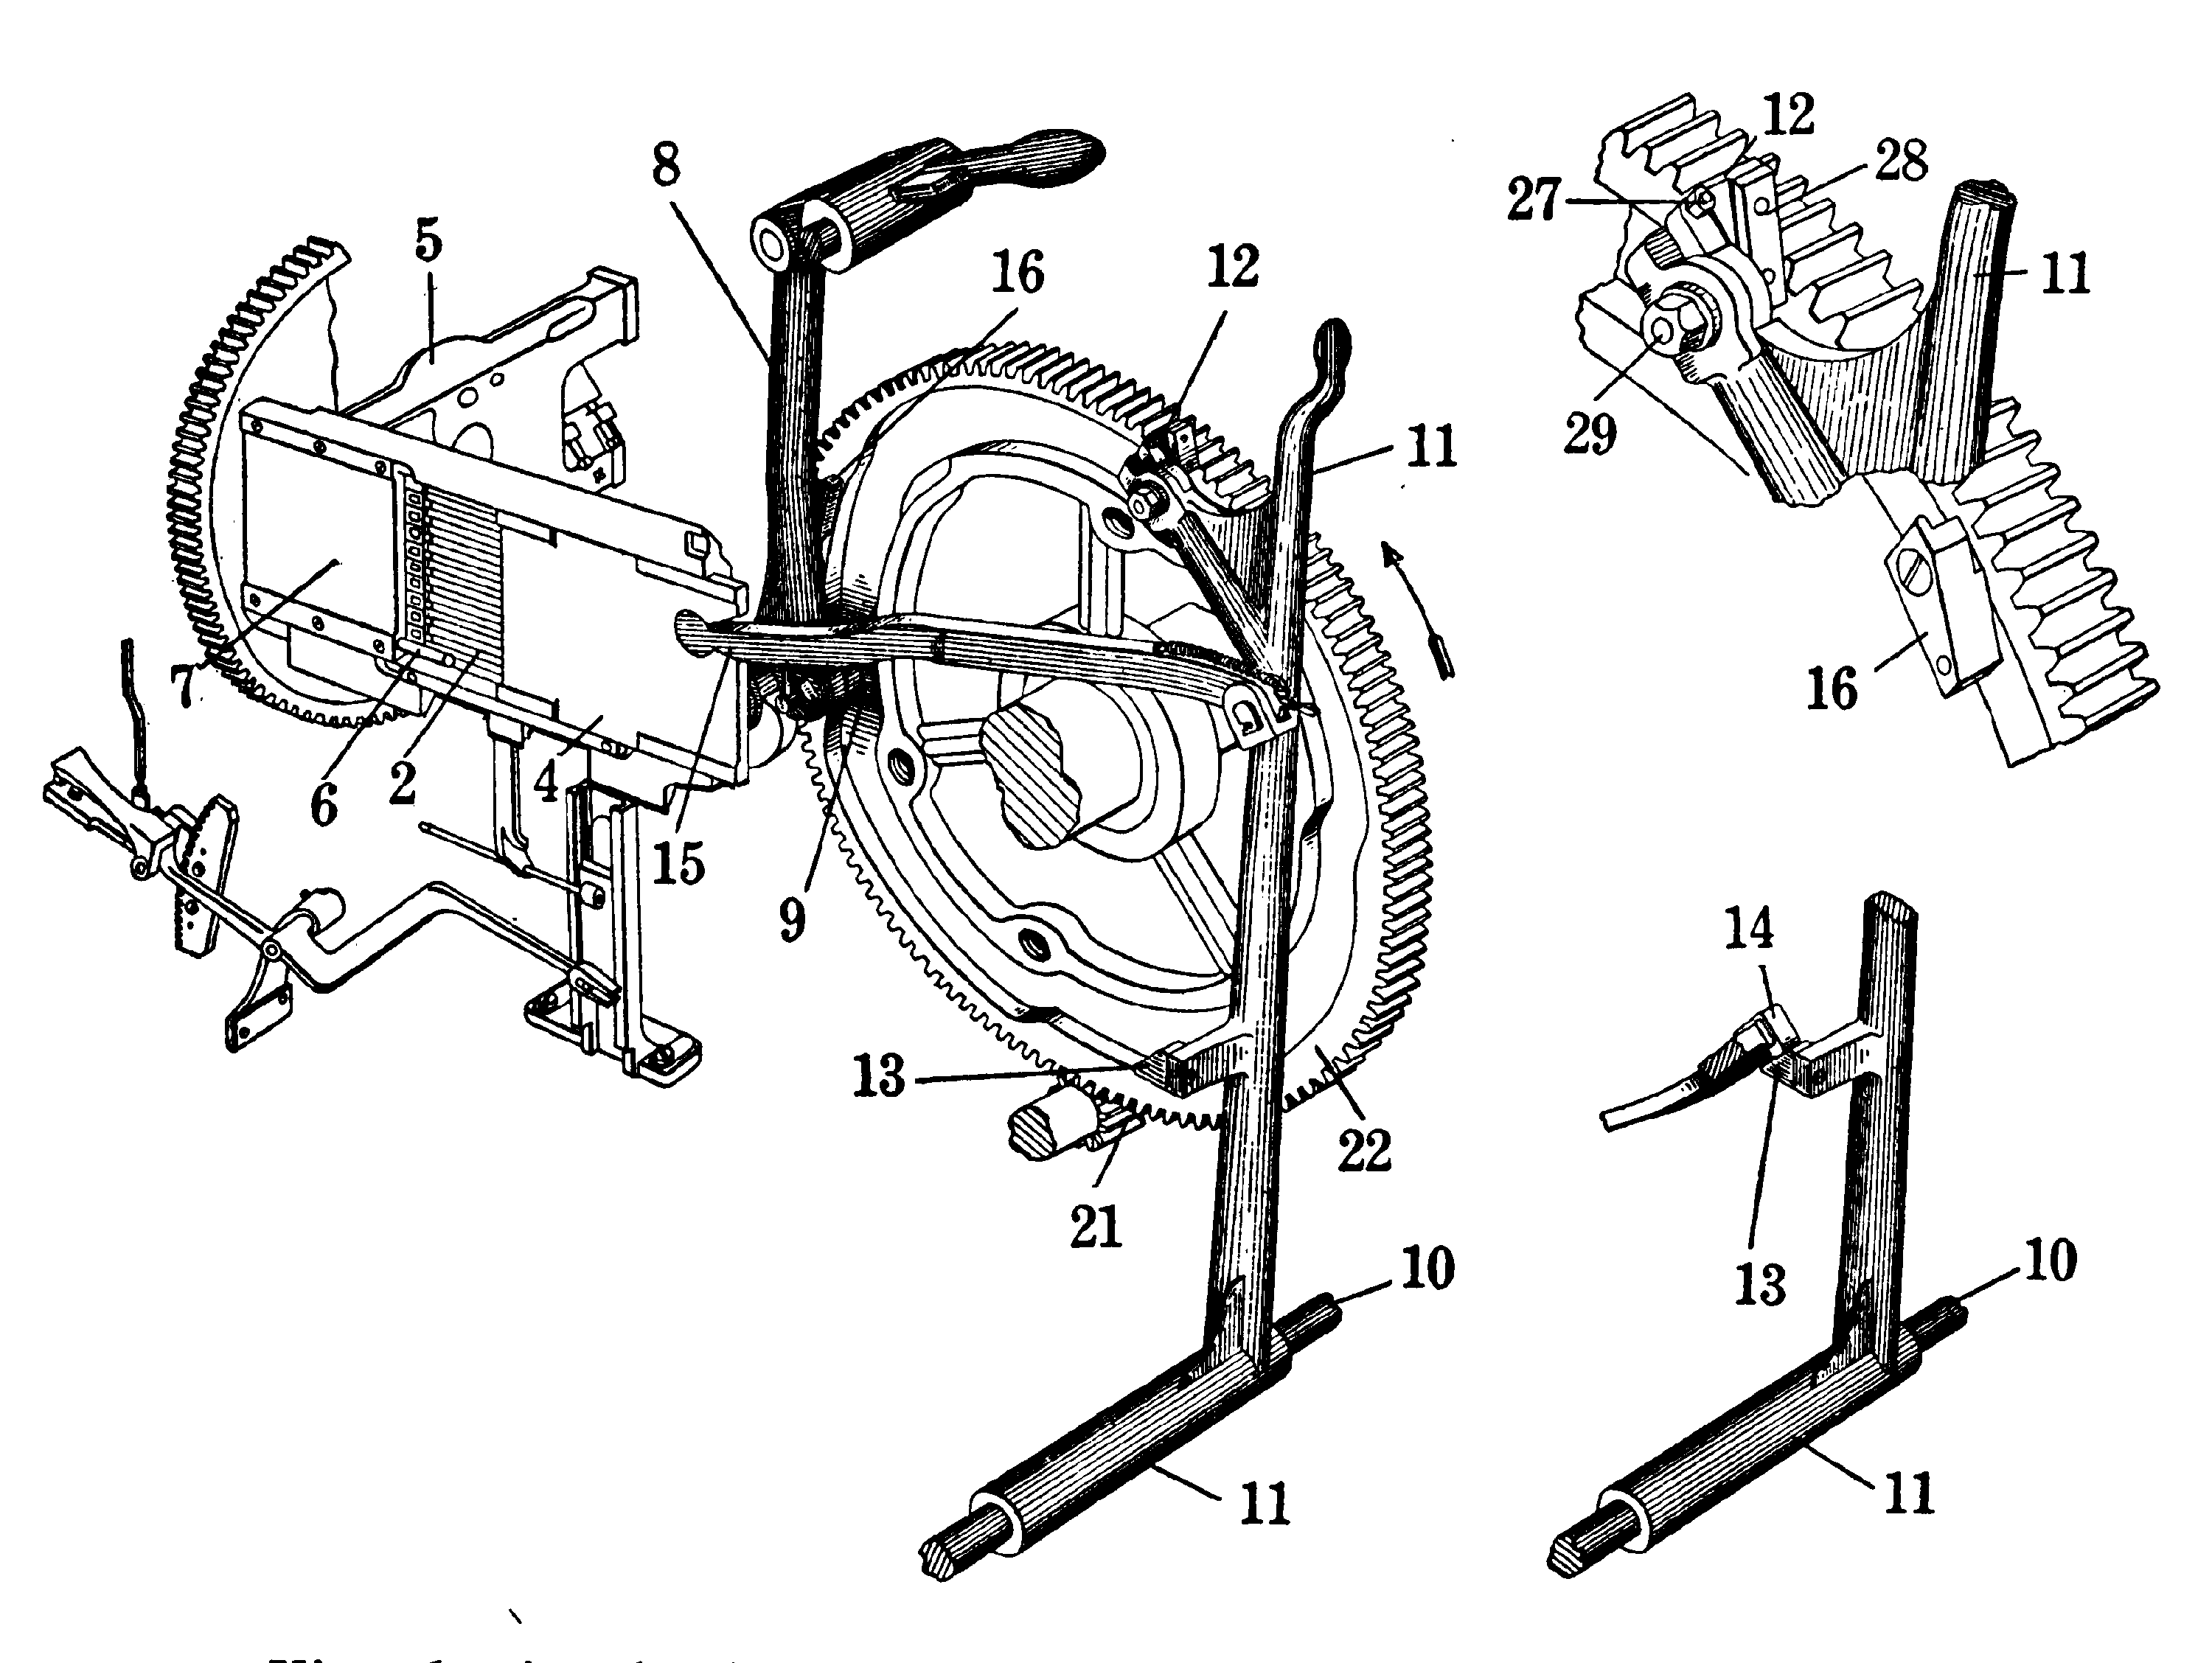 Line drawing of ejector lever and cam.